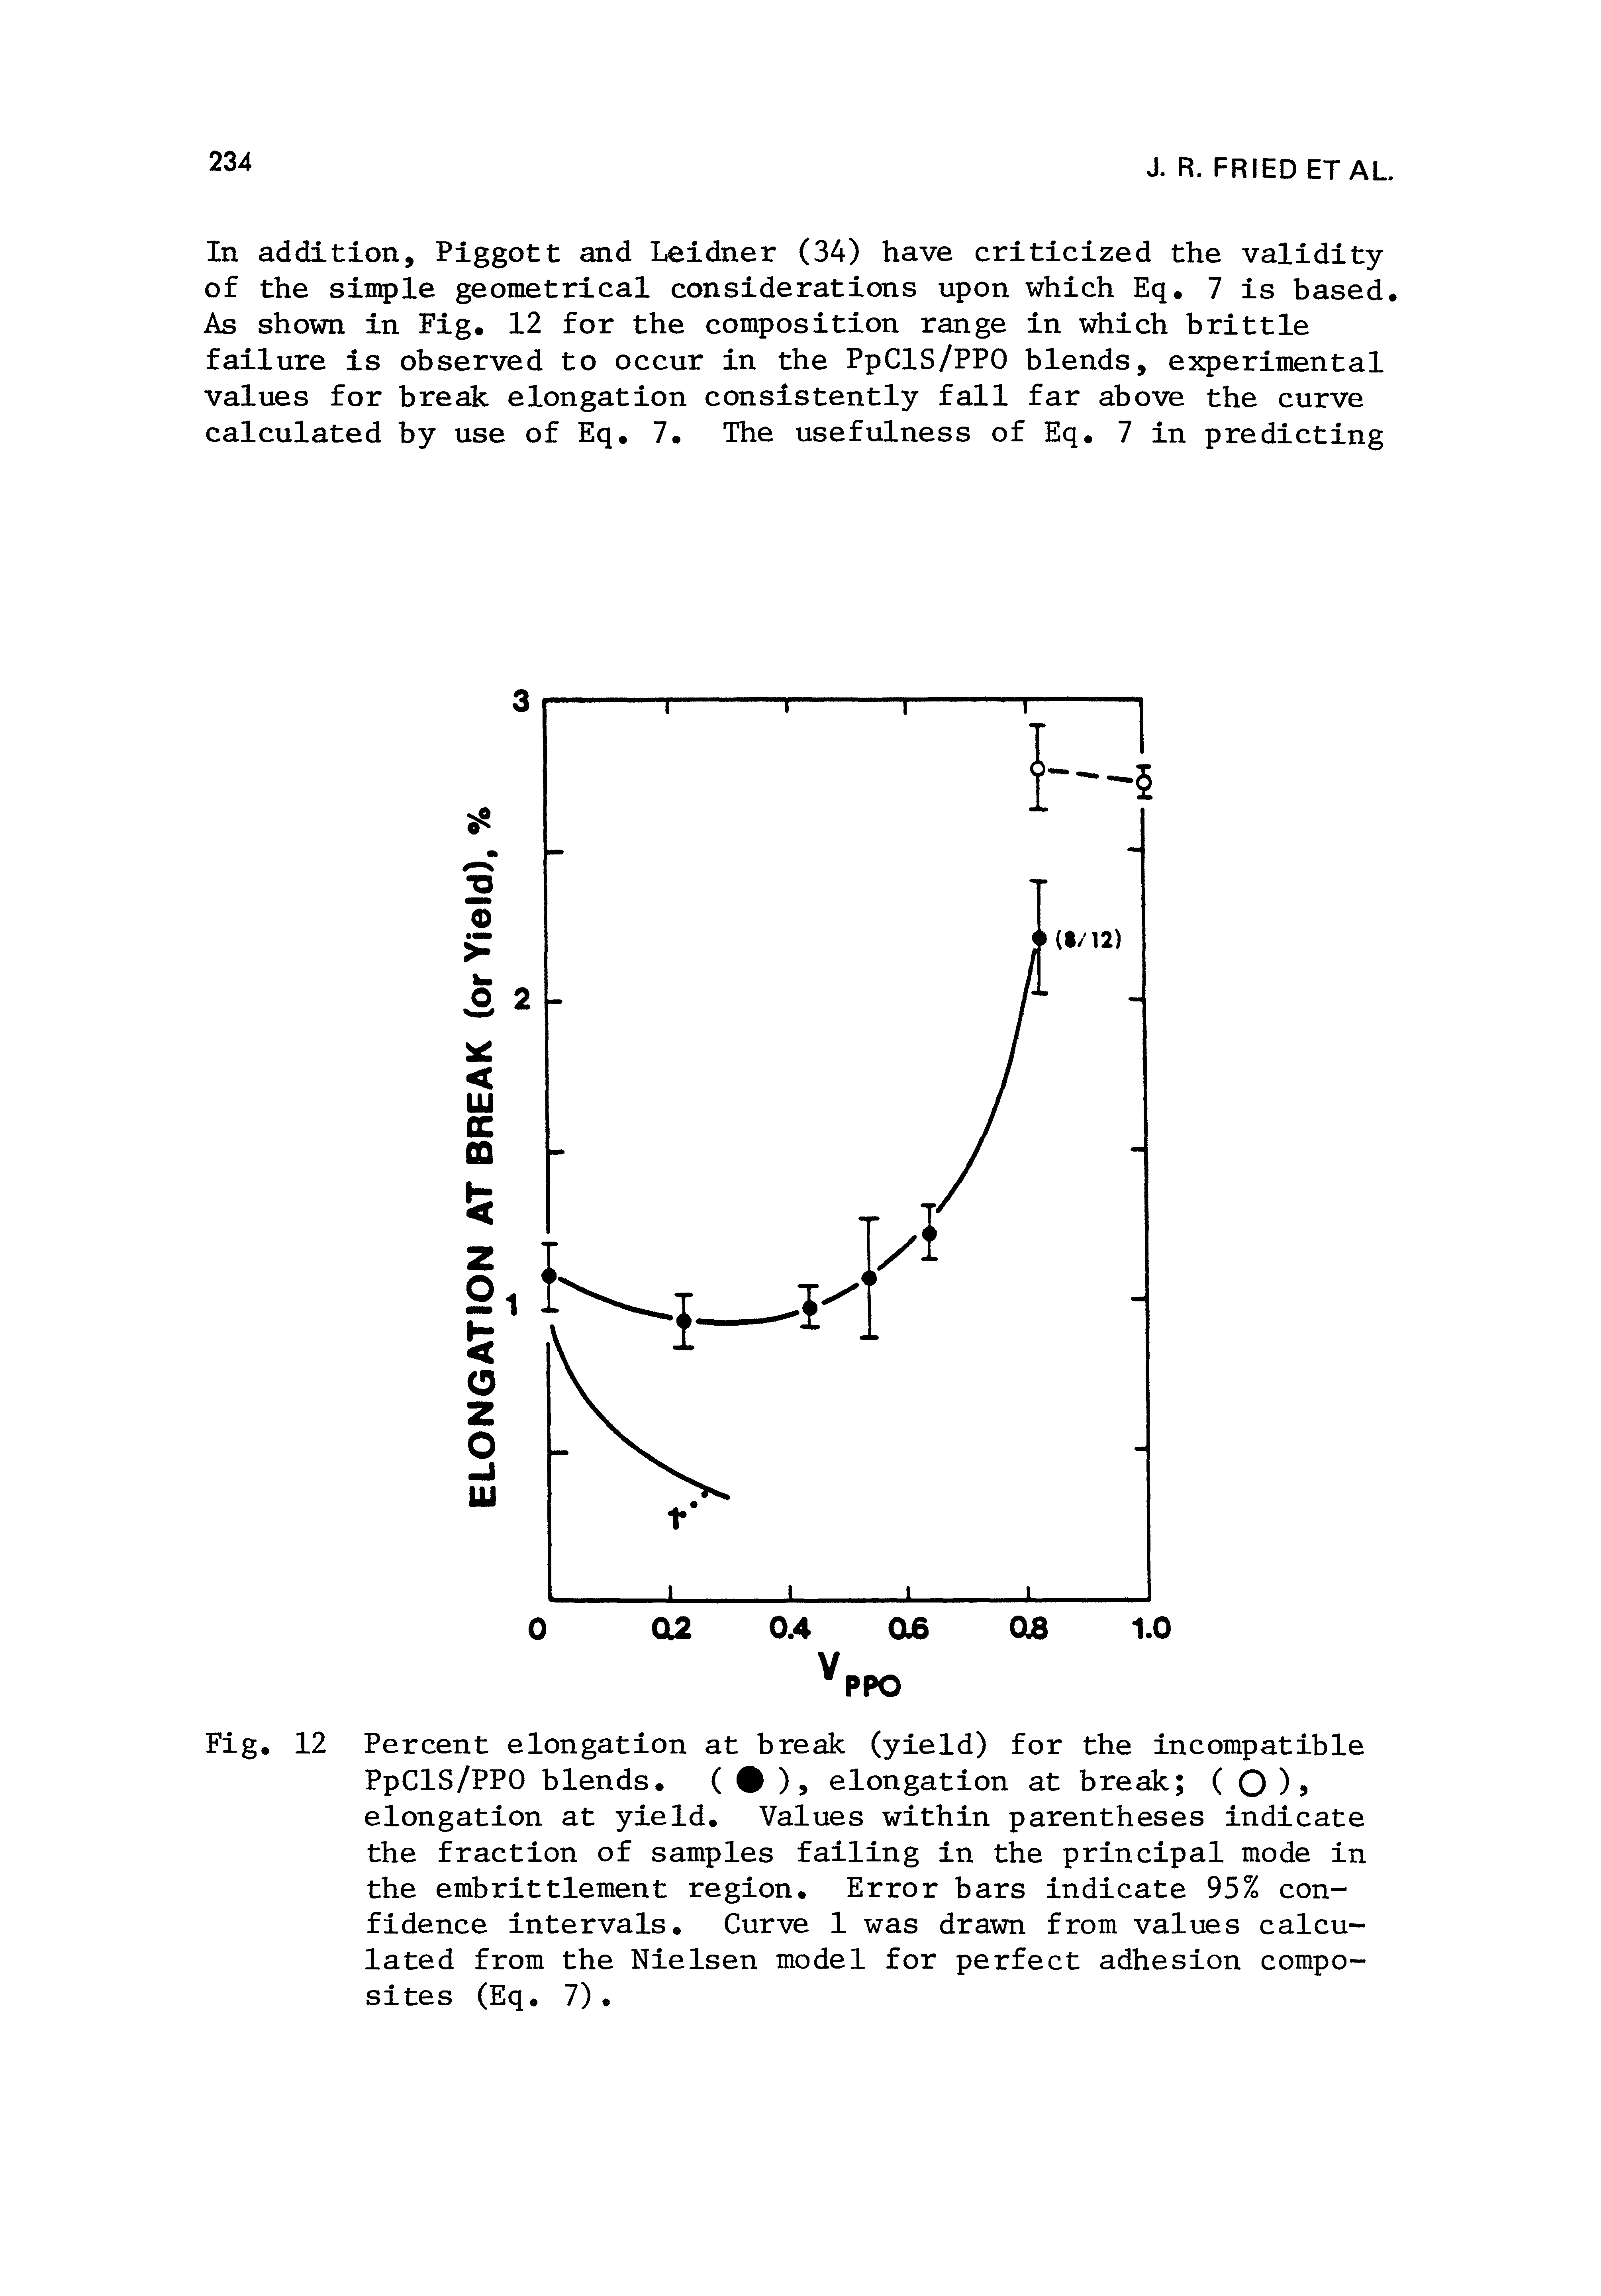 Fig. 12 Percent elongation at break (yield) for the incompatible PpCIS/PPO blends. ( ), elongation at break ( O elongation at yield. Values within parentheses indicate the fraction of samples failing in the principal mode in the embrittlement region. Error bars indicate 95% confidence intervals. Curve 1 was drawn from values calculated from the Nielsen model for perfect adhesion composites (Eq. 7).